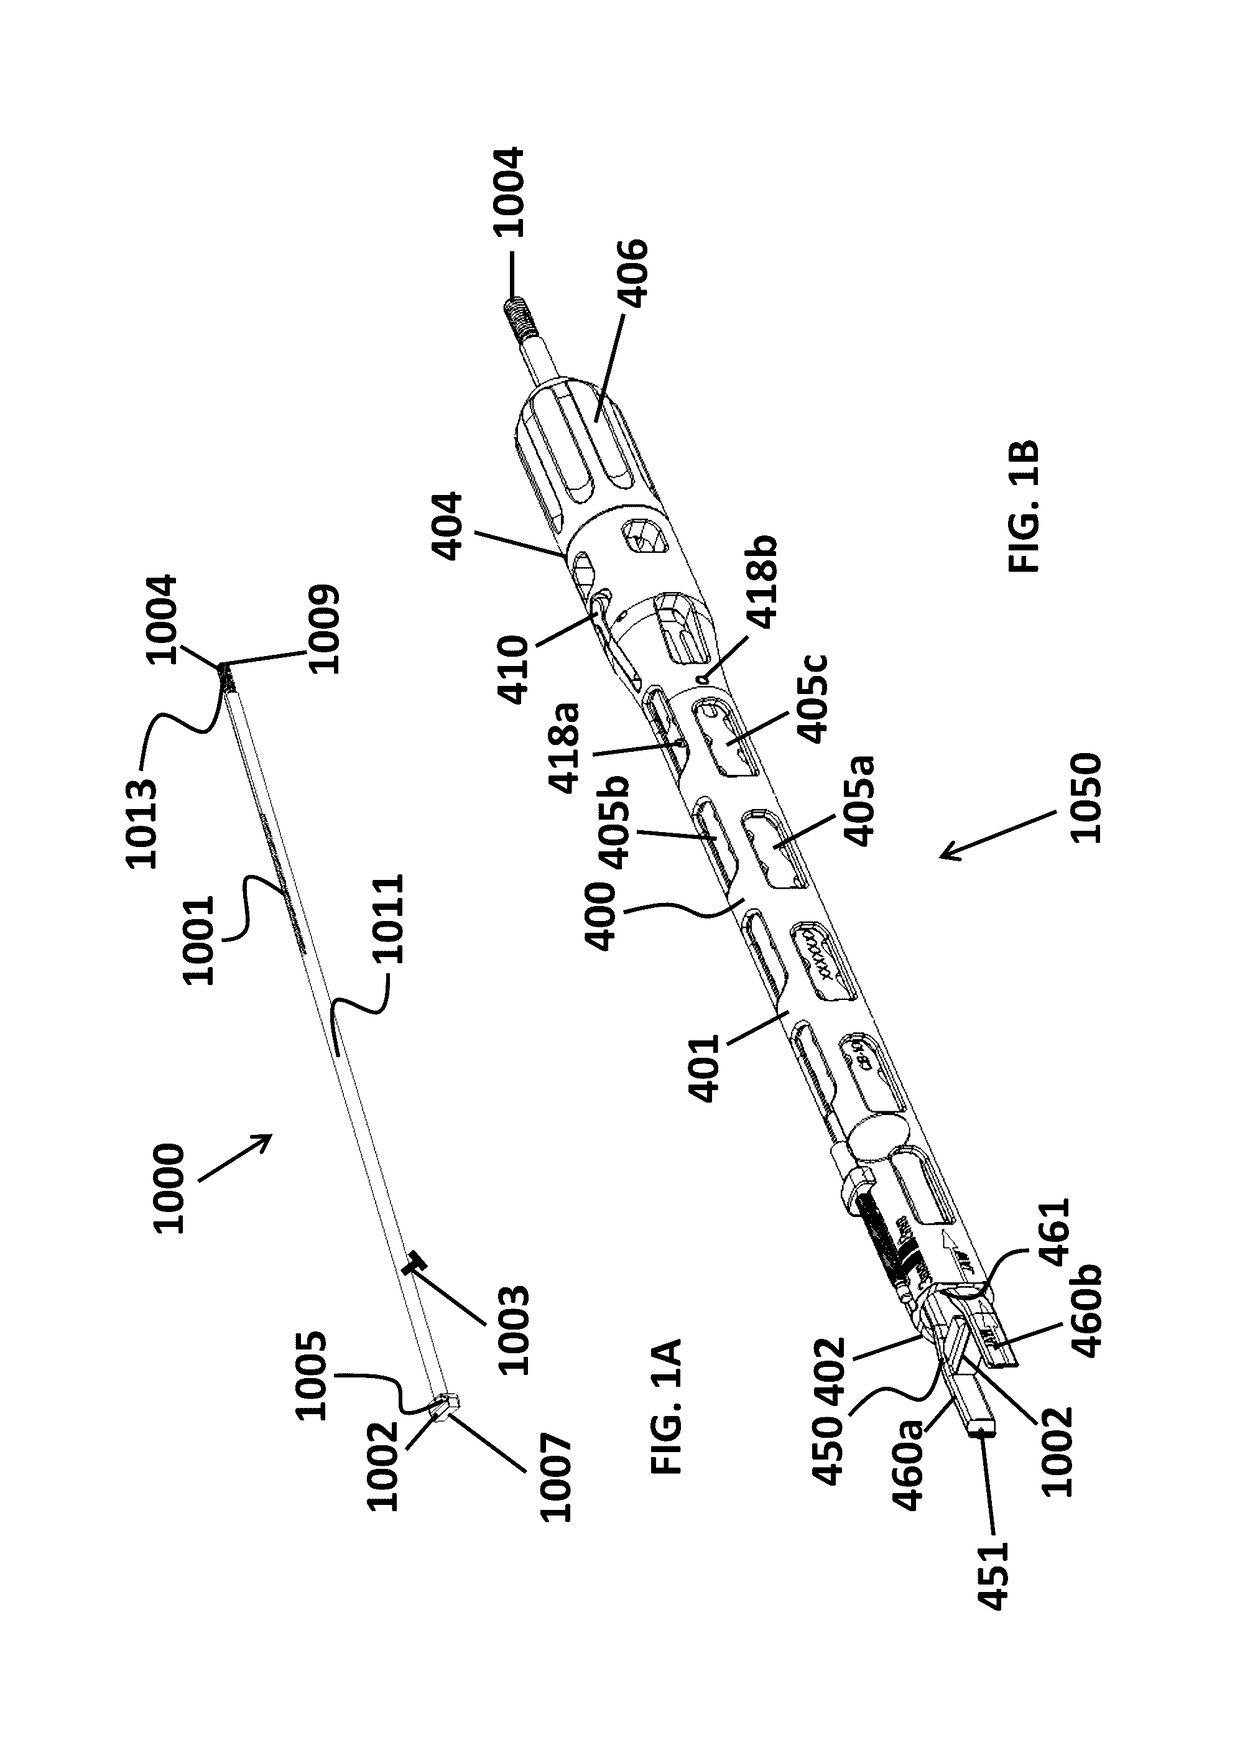 Insertion tool for implant and methods of use